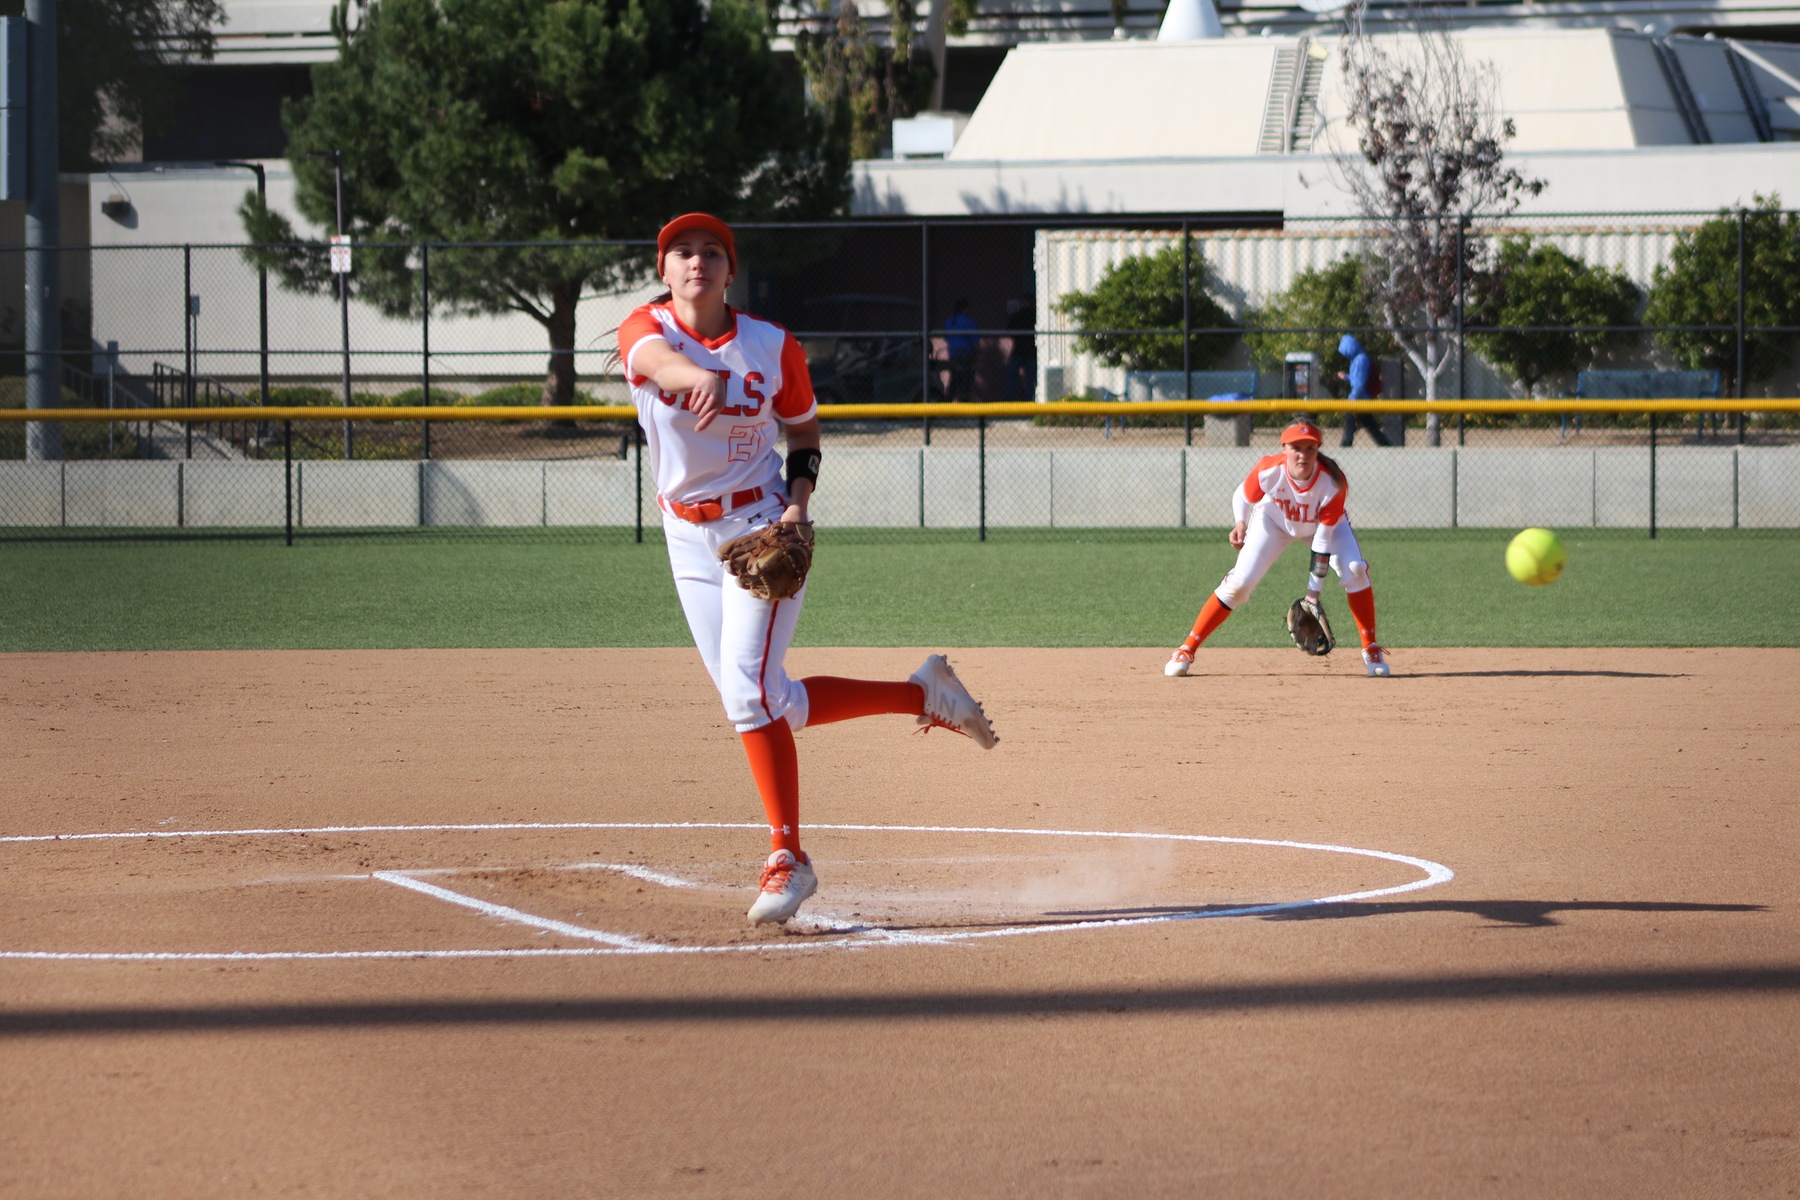 Emily Peredez delivers form the mound as Becky Winder prepares at 2nd. Photo credit: Treyvon Watts-Hale